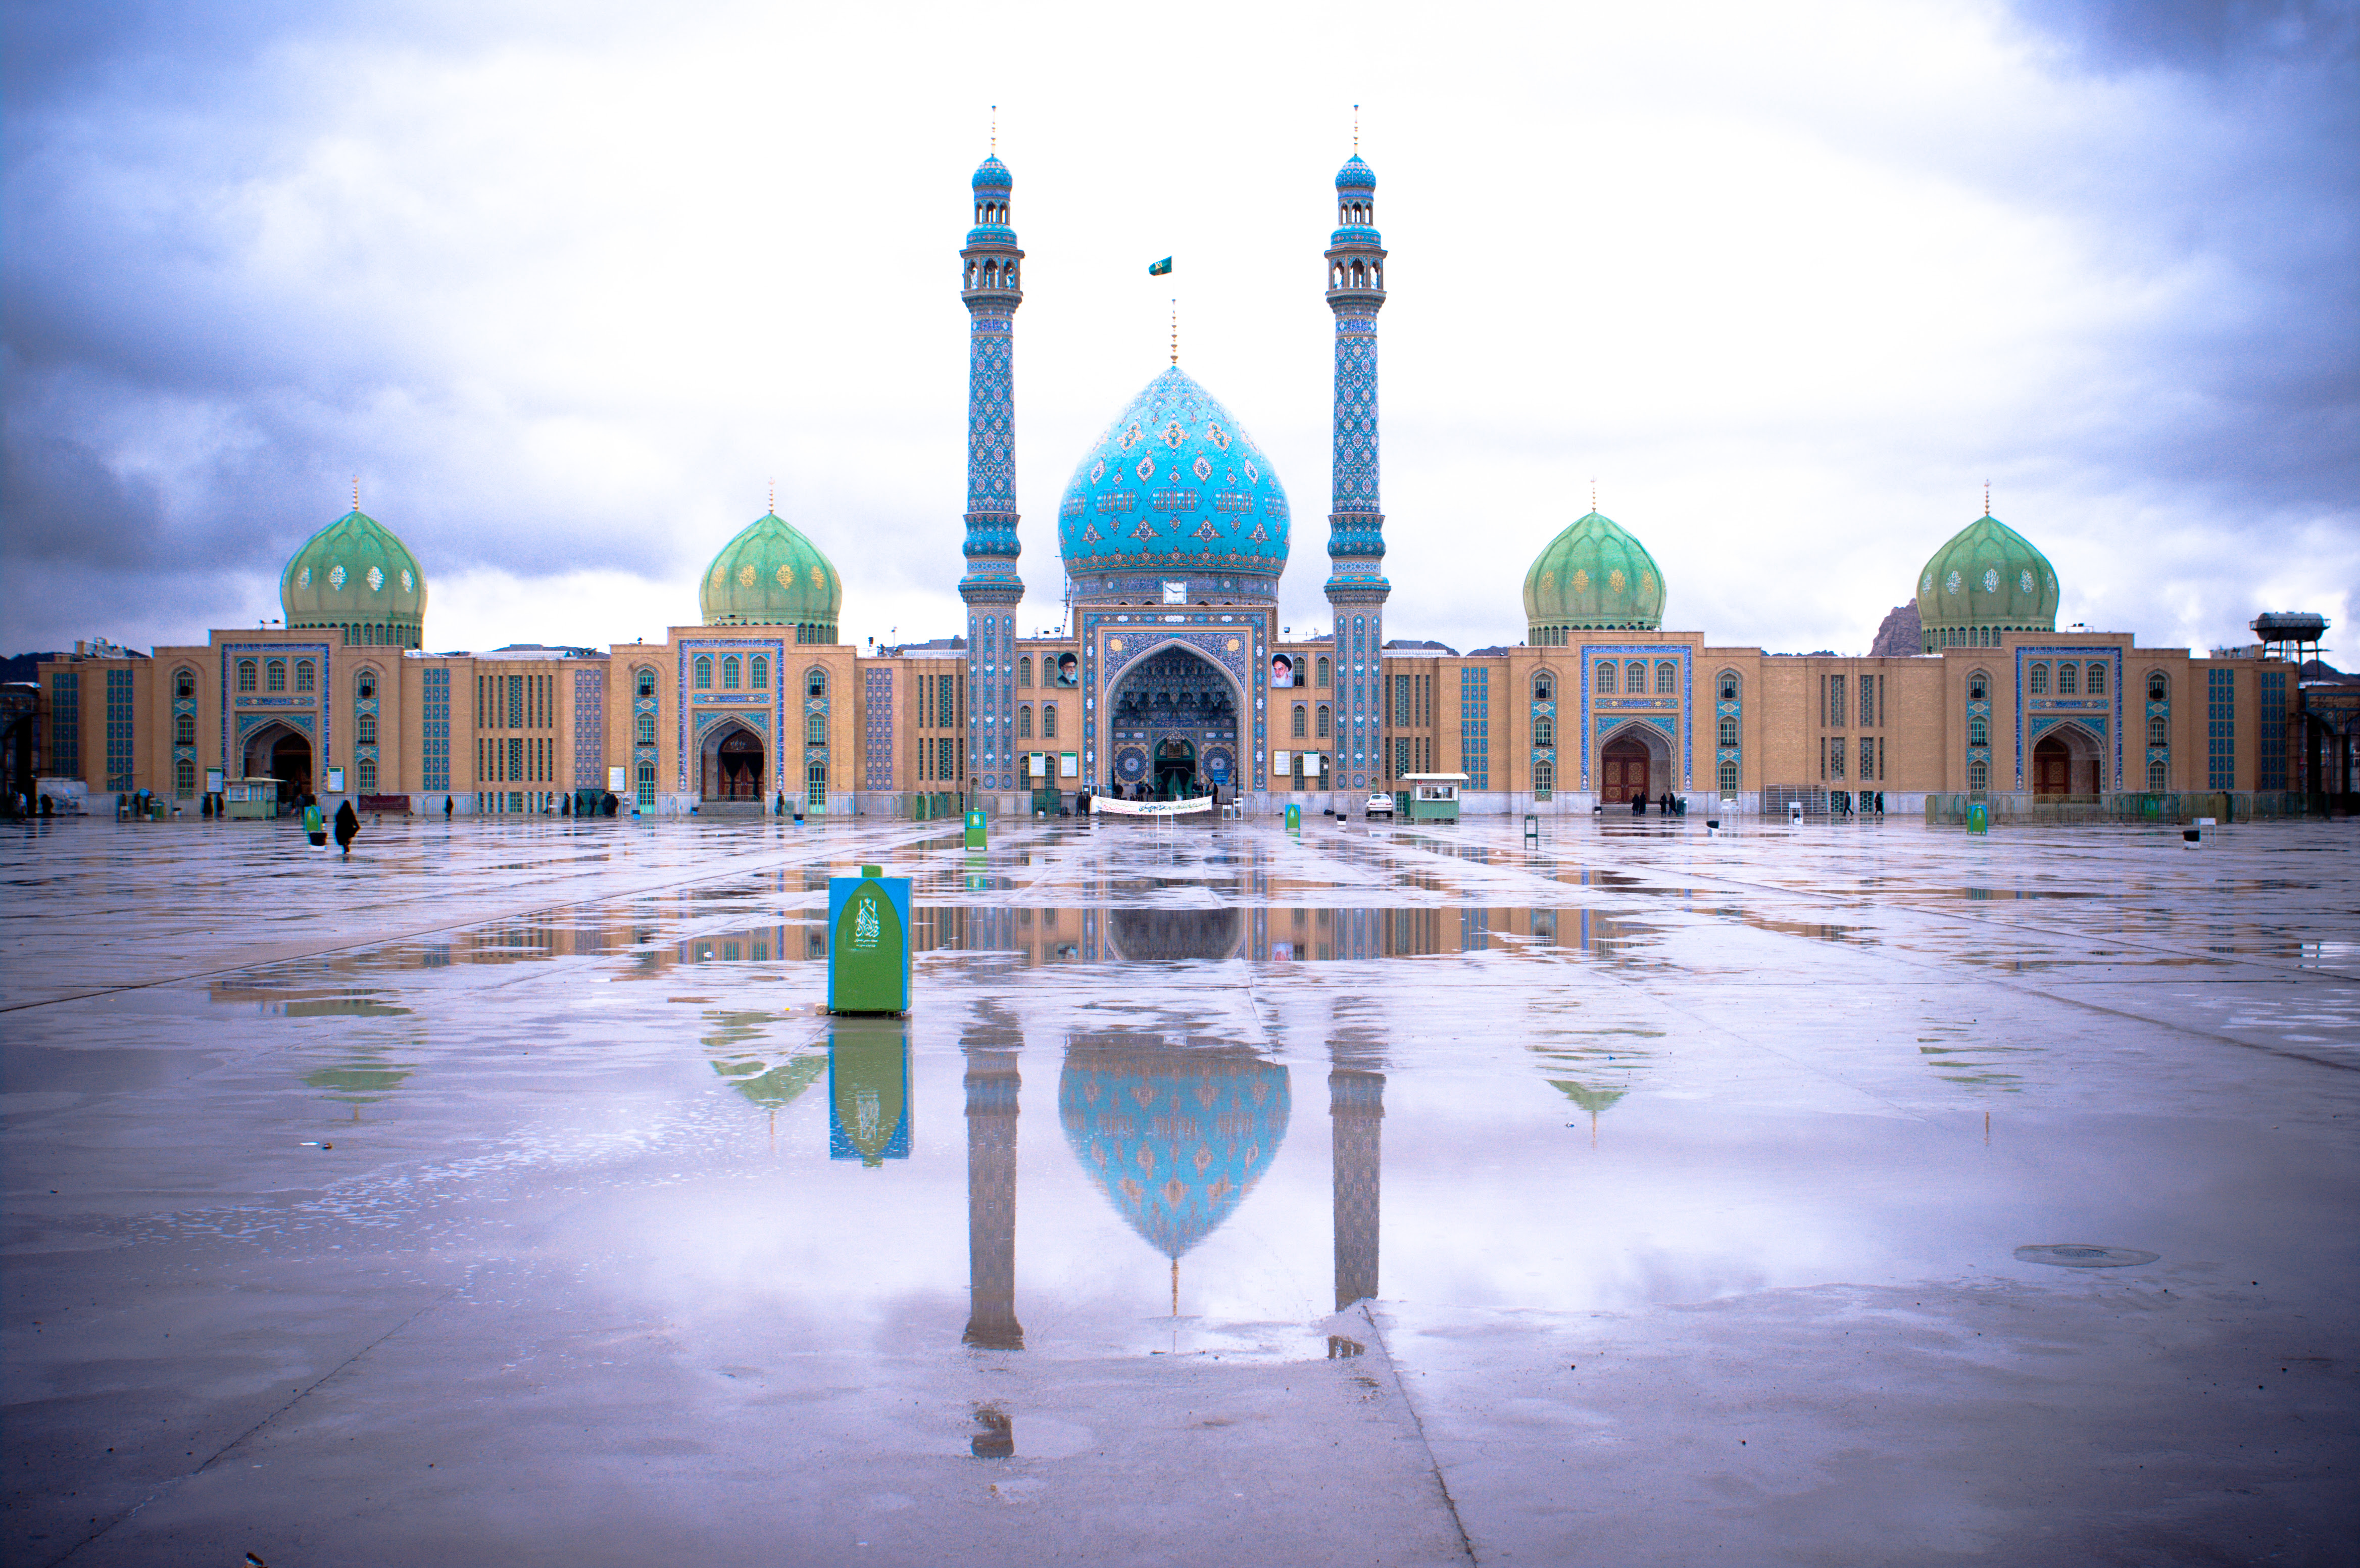  The Jamkaran Mosque is a popular pilgrimage site for Shiite Muslims